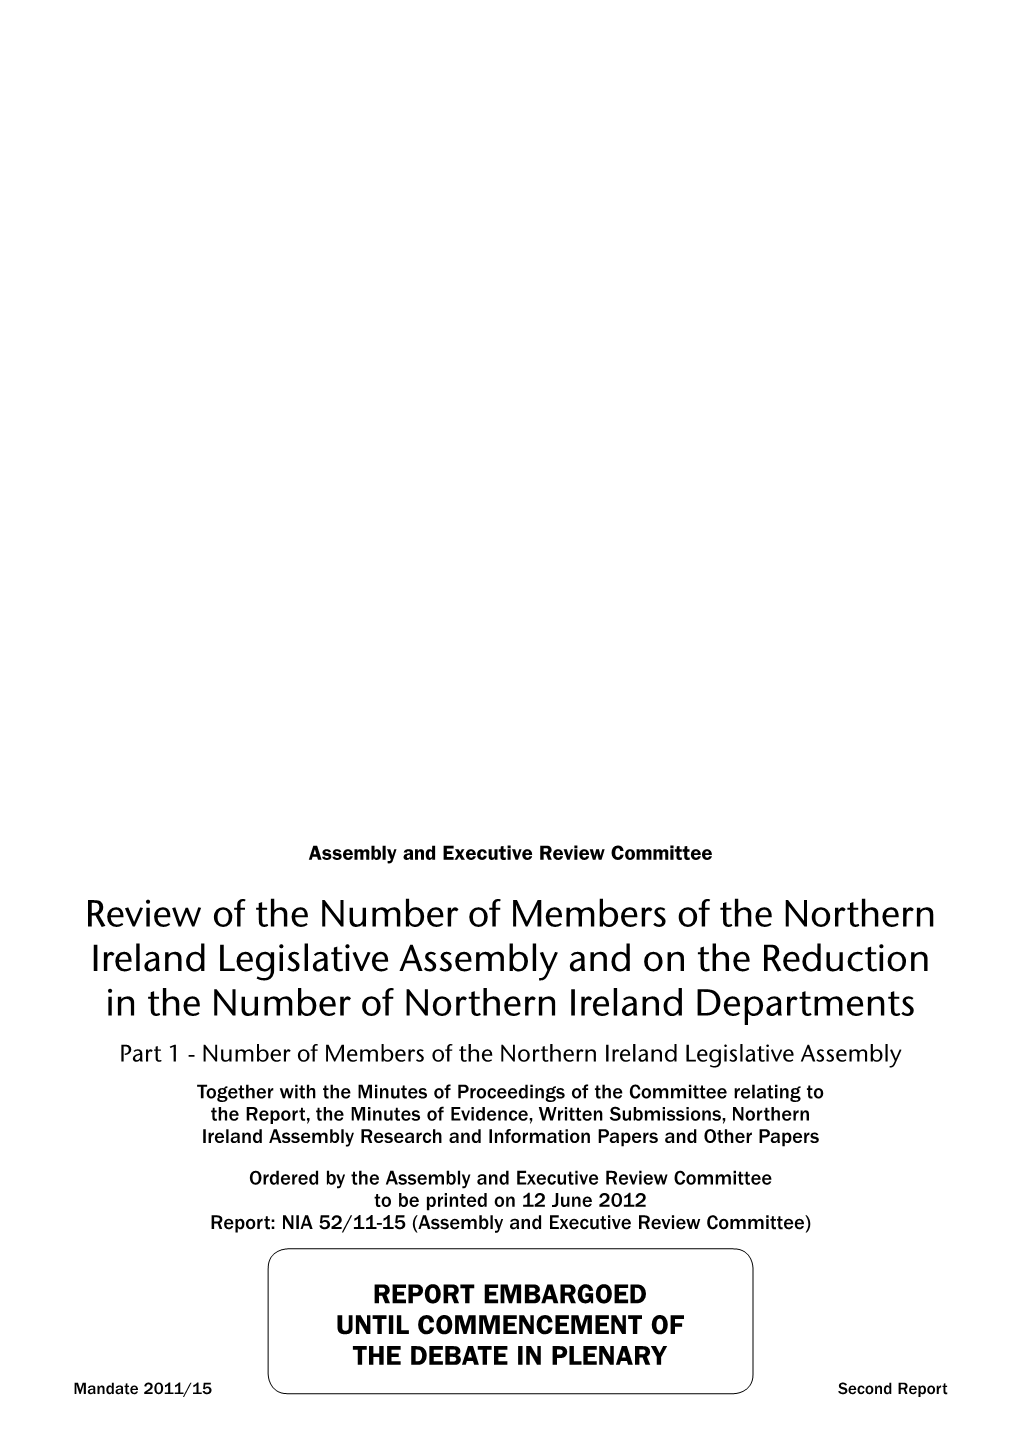 Review of the Number of Members of the Northern Ireland Legislative